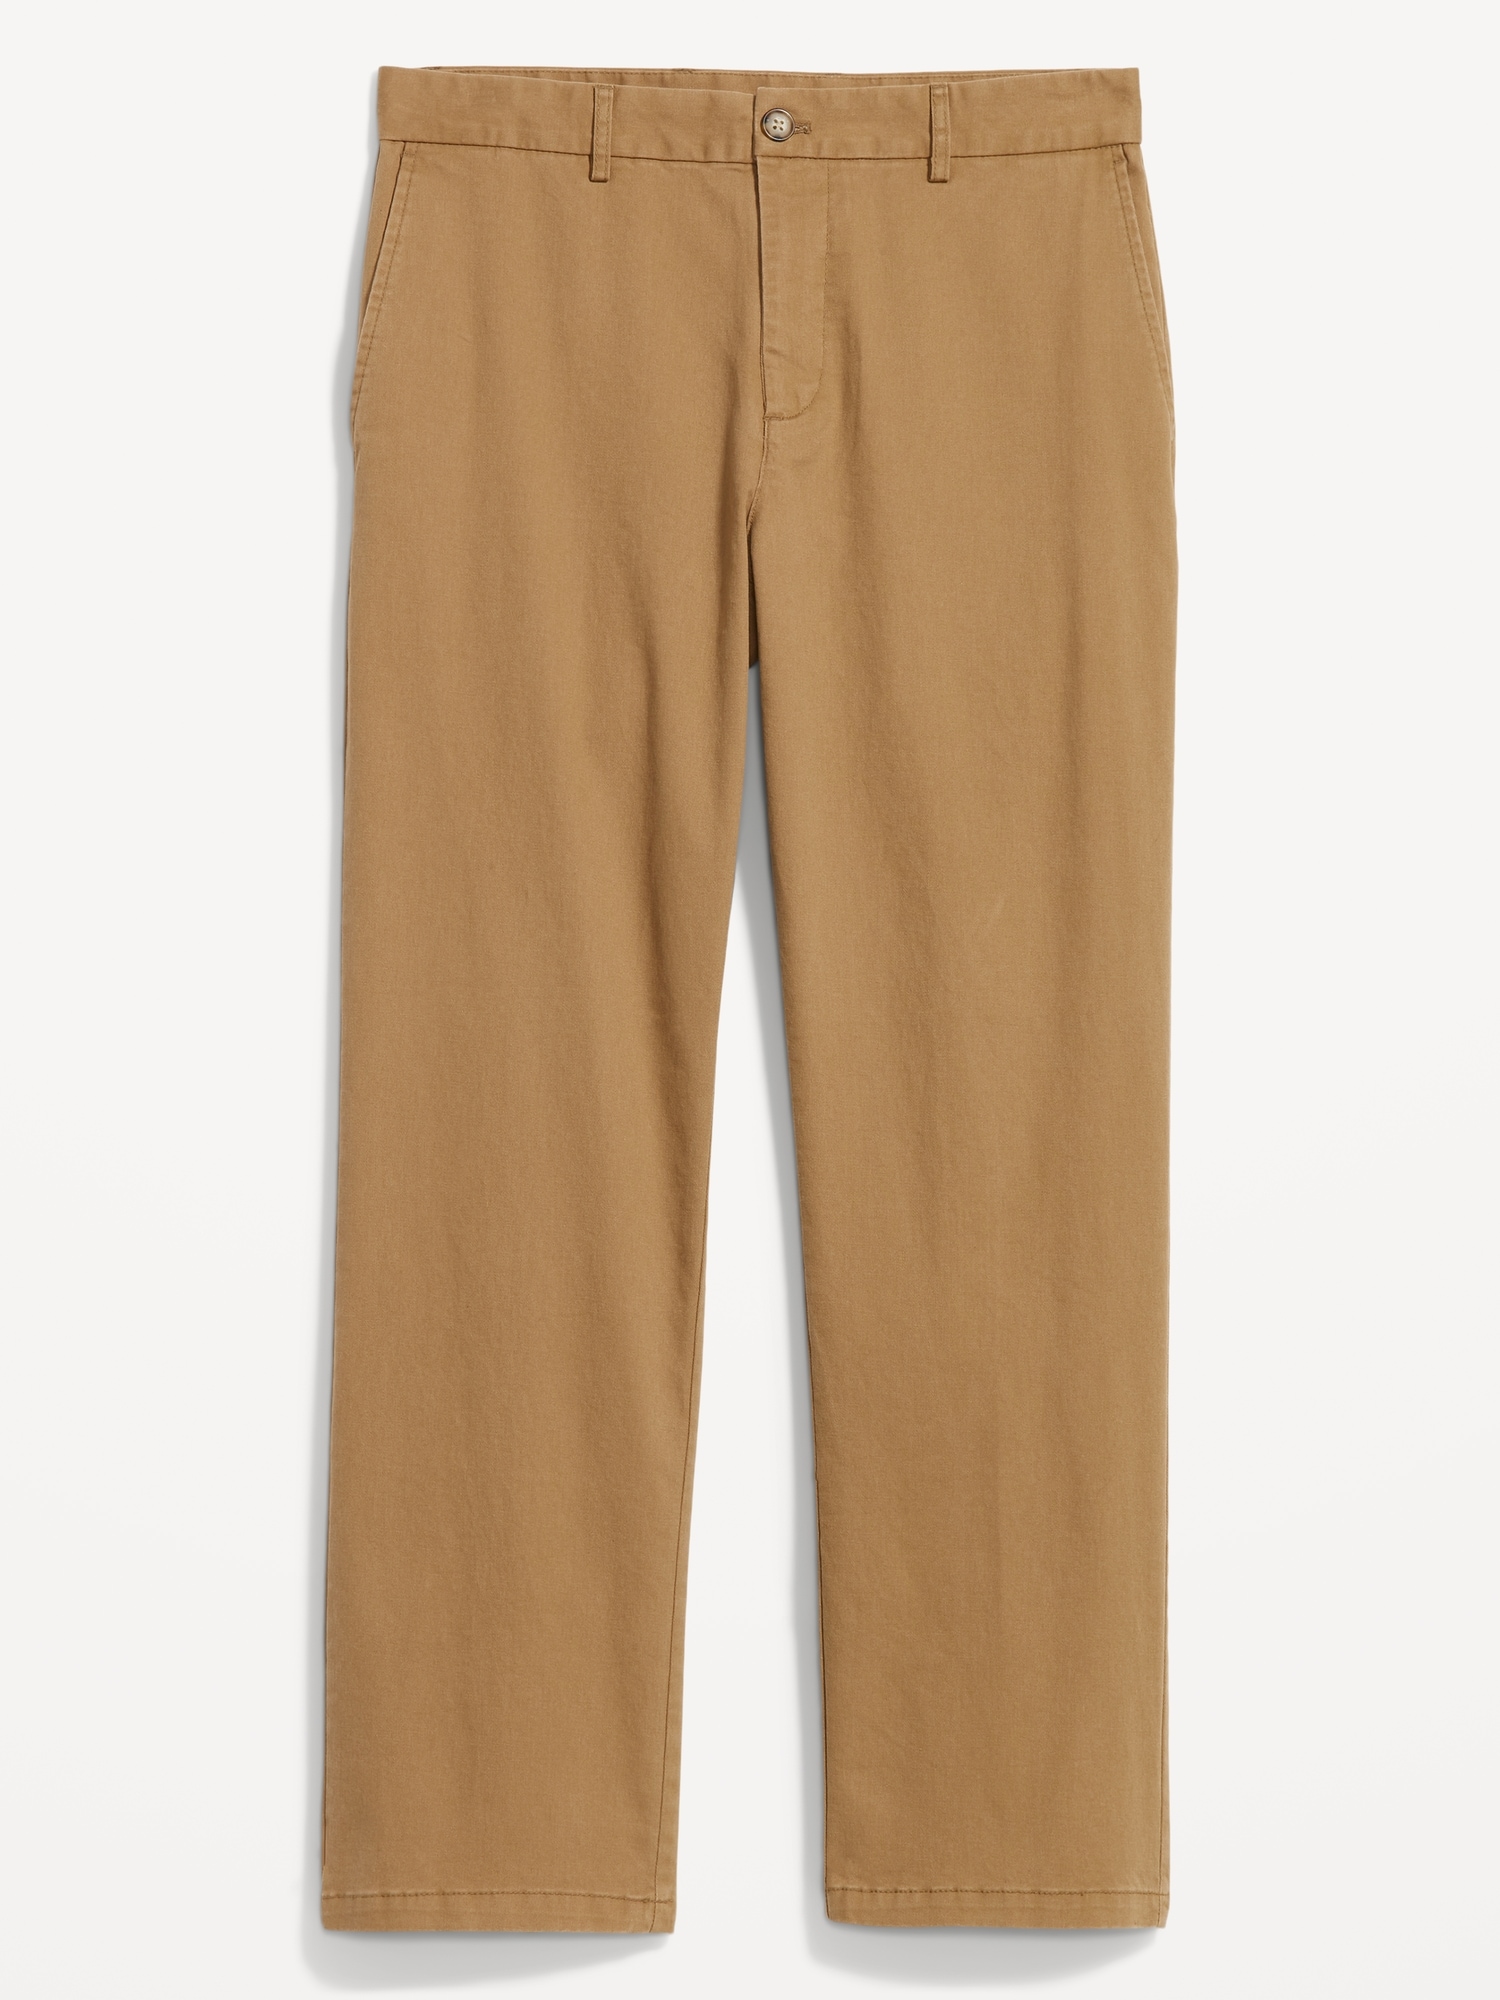 Loose Built-In Flex Rotation Chino Pants | Old Navy